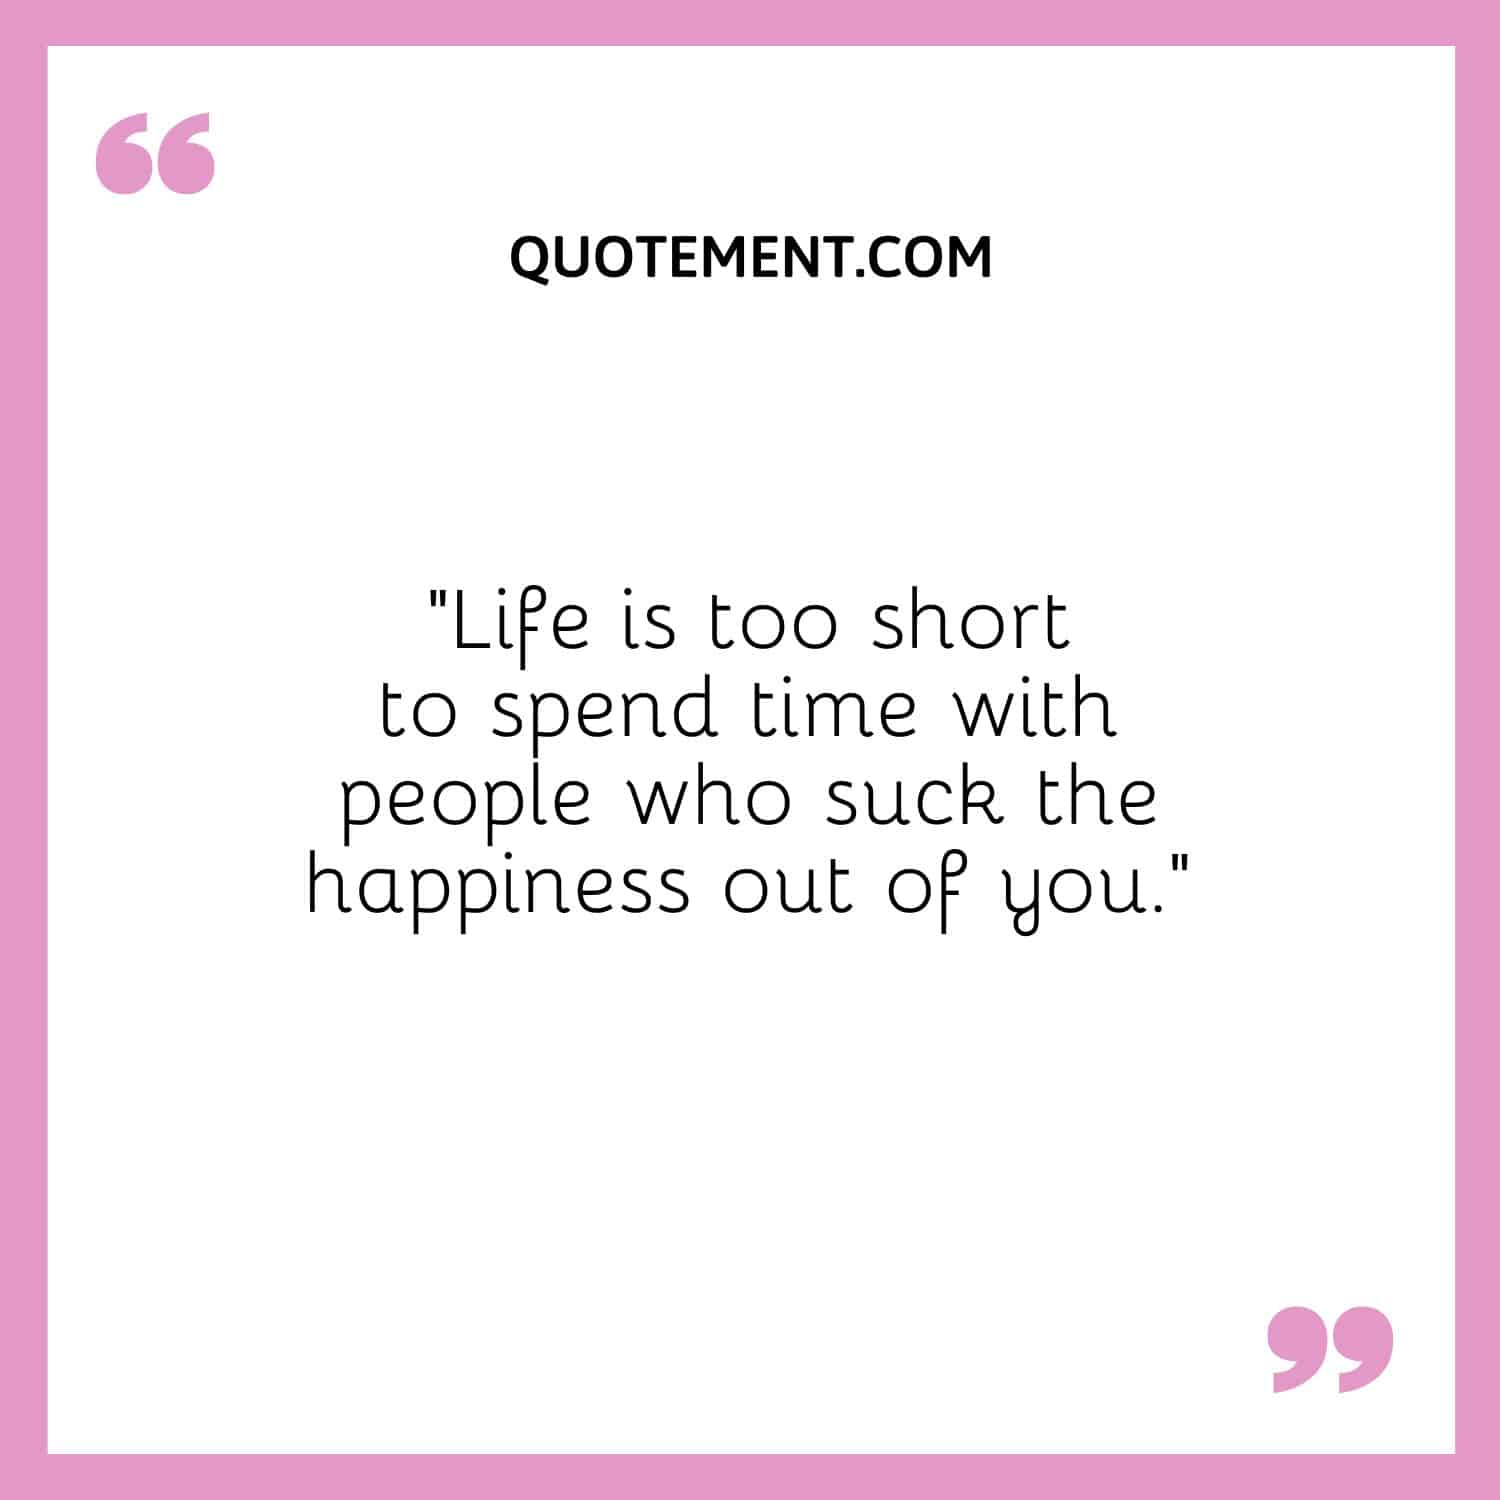 Life is too short